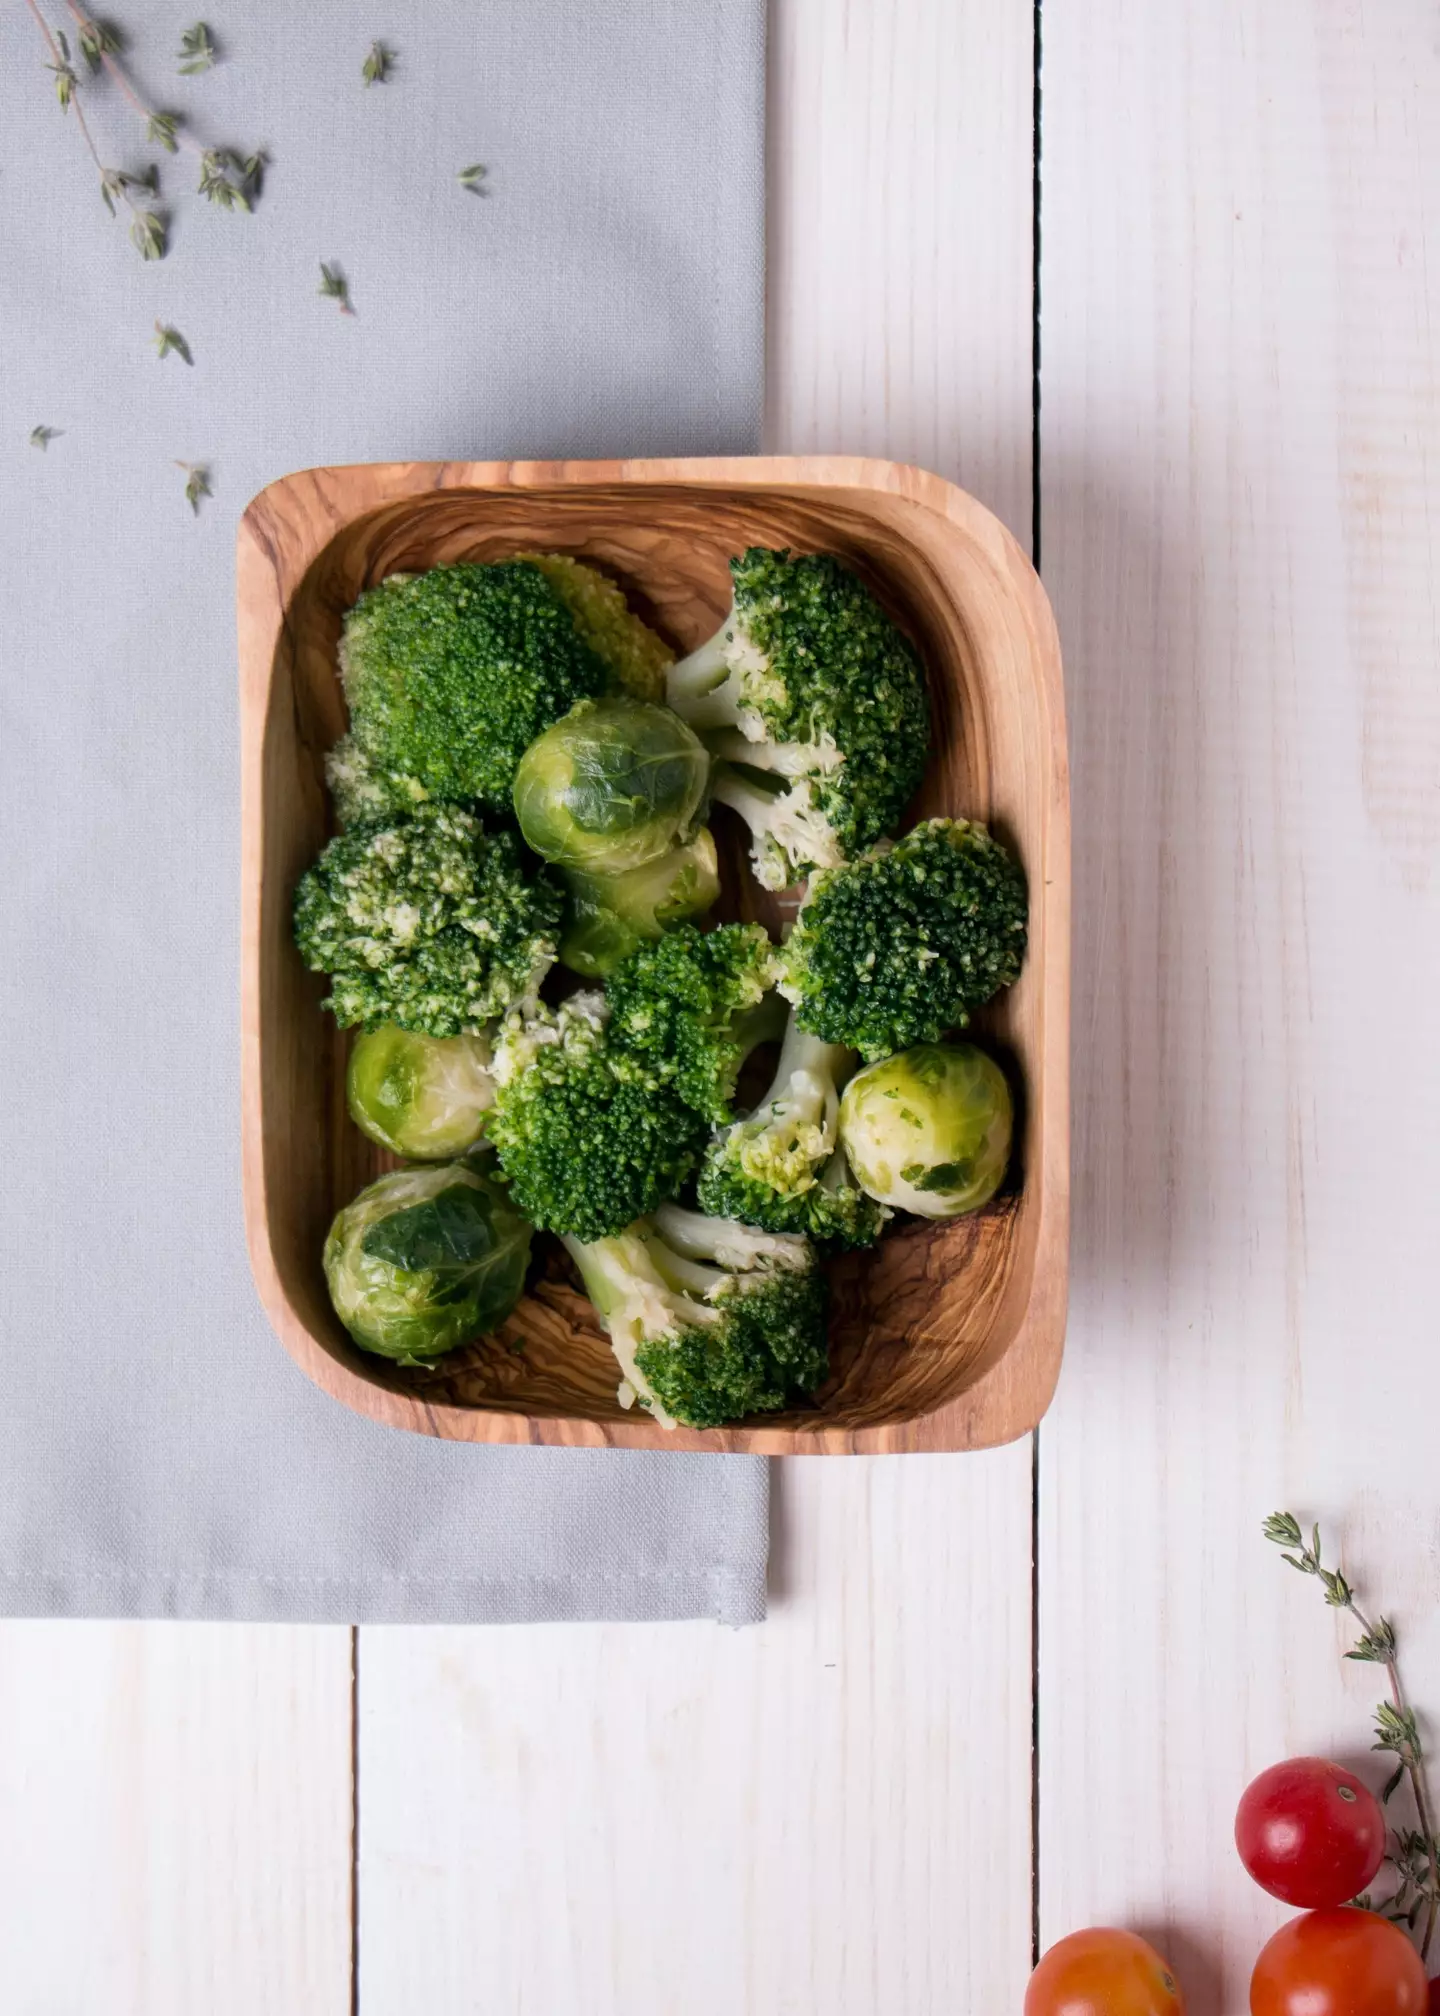 Consuming vegetables such as broccoli can produce smelly gas.